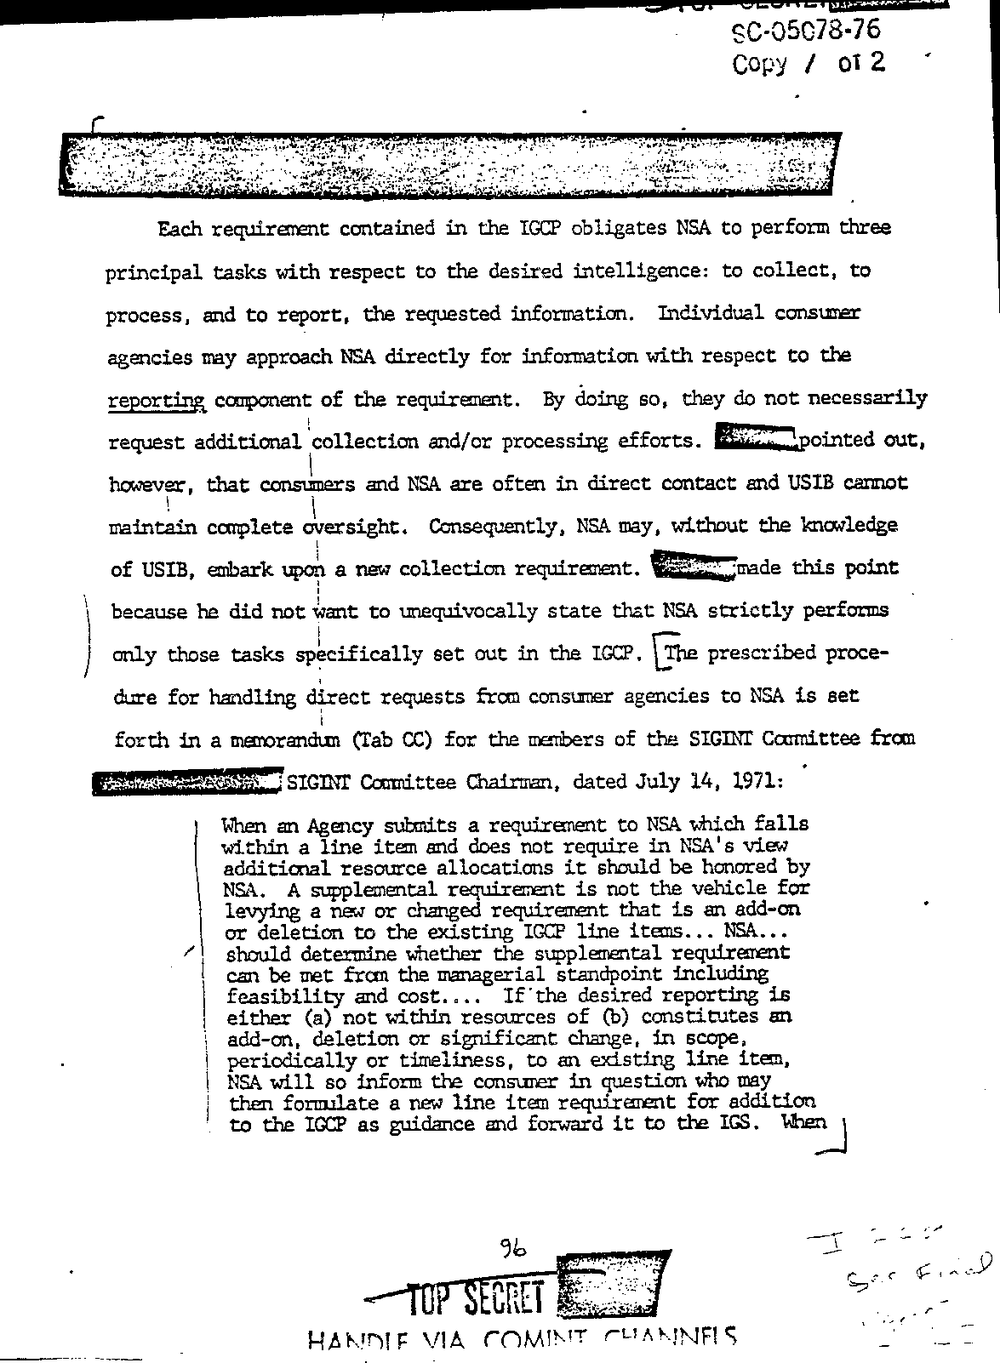 Page 104 from Report on Inquiry Into CIA Related Electronic Surveillance Activities